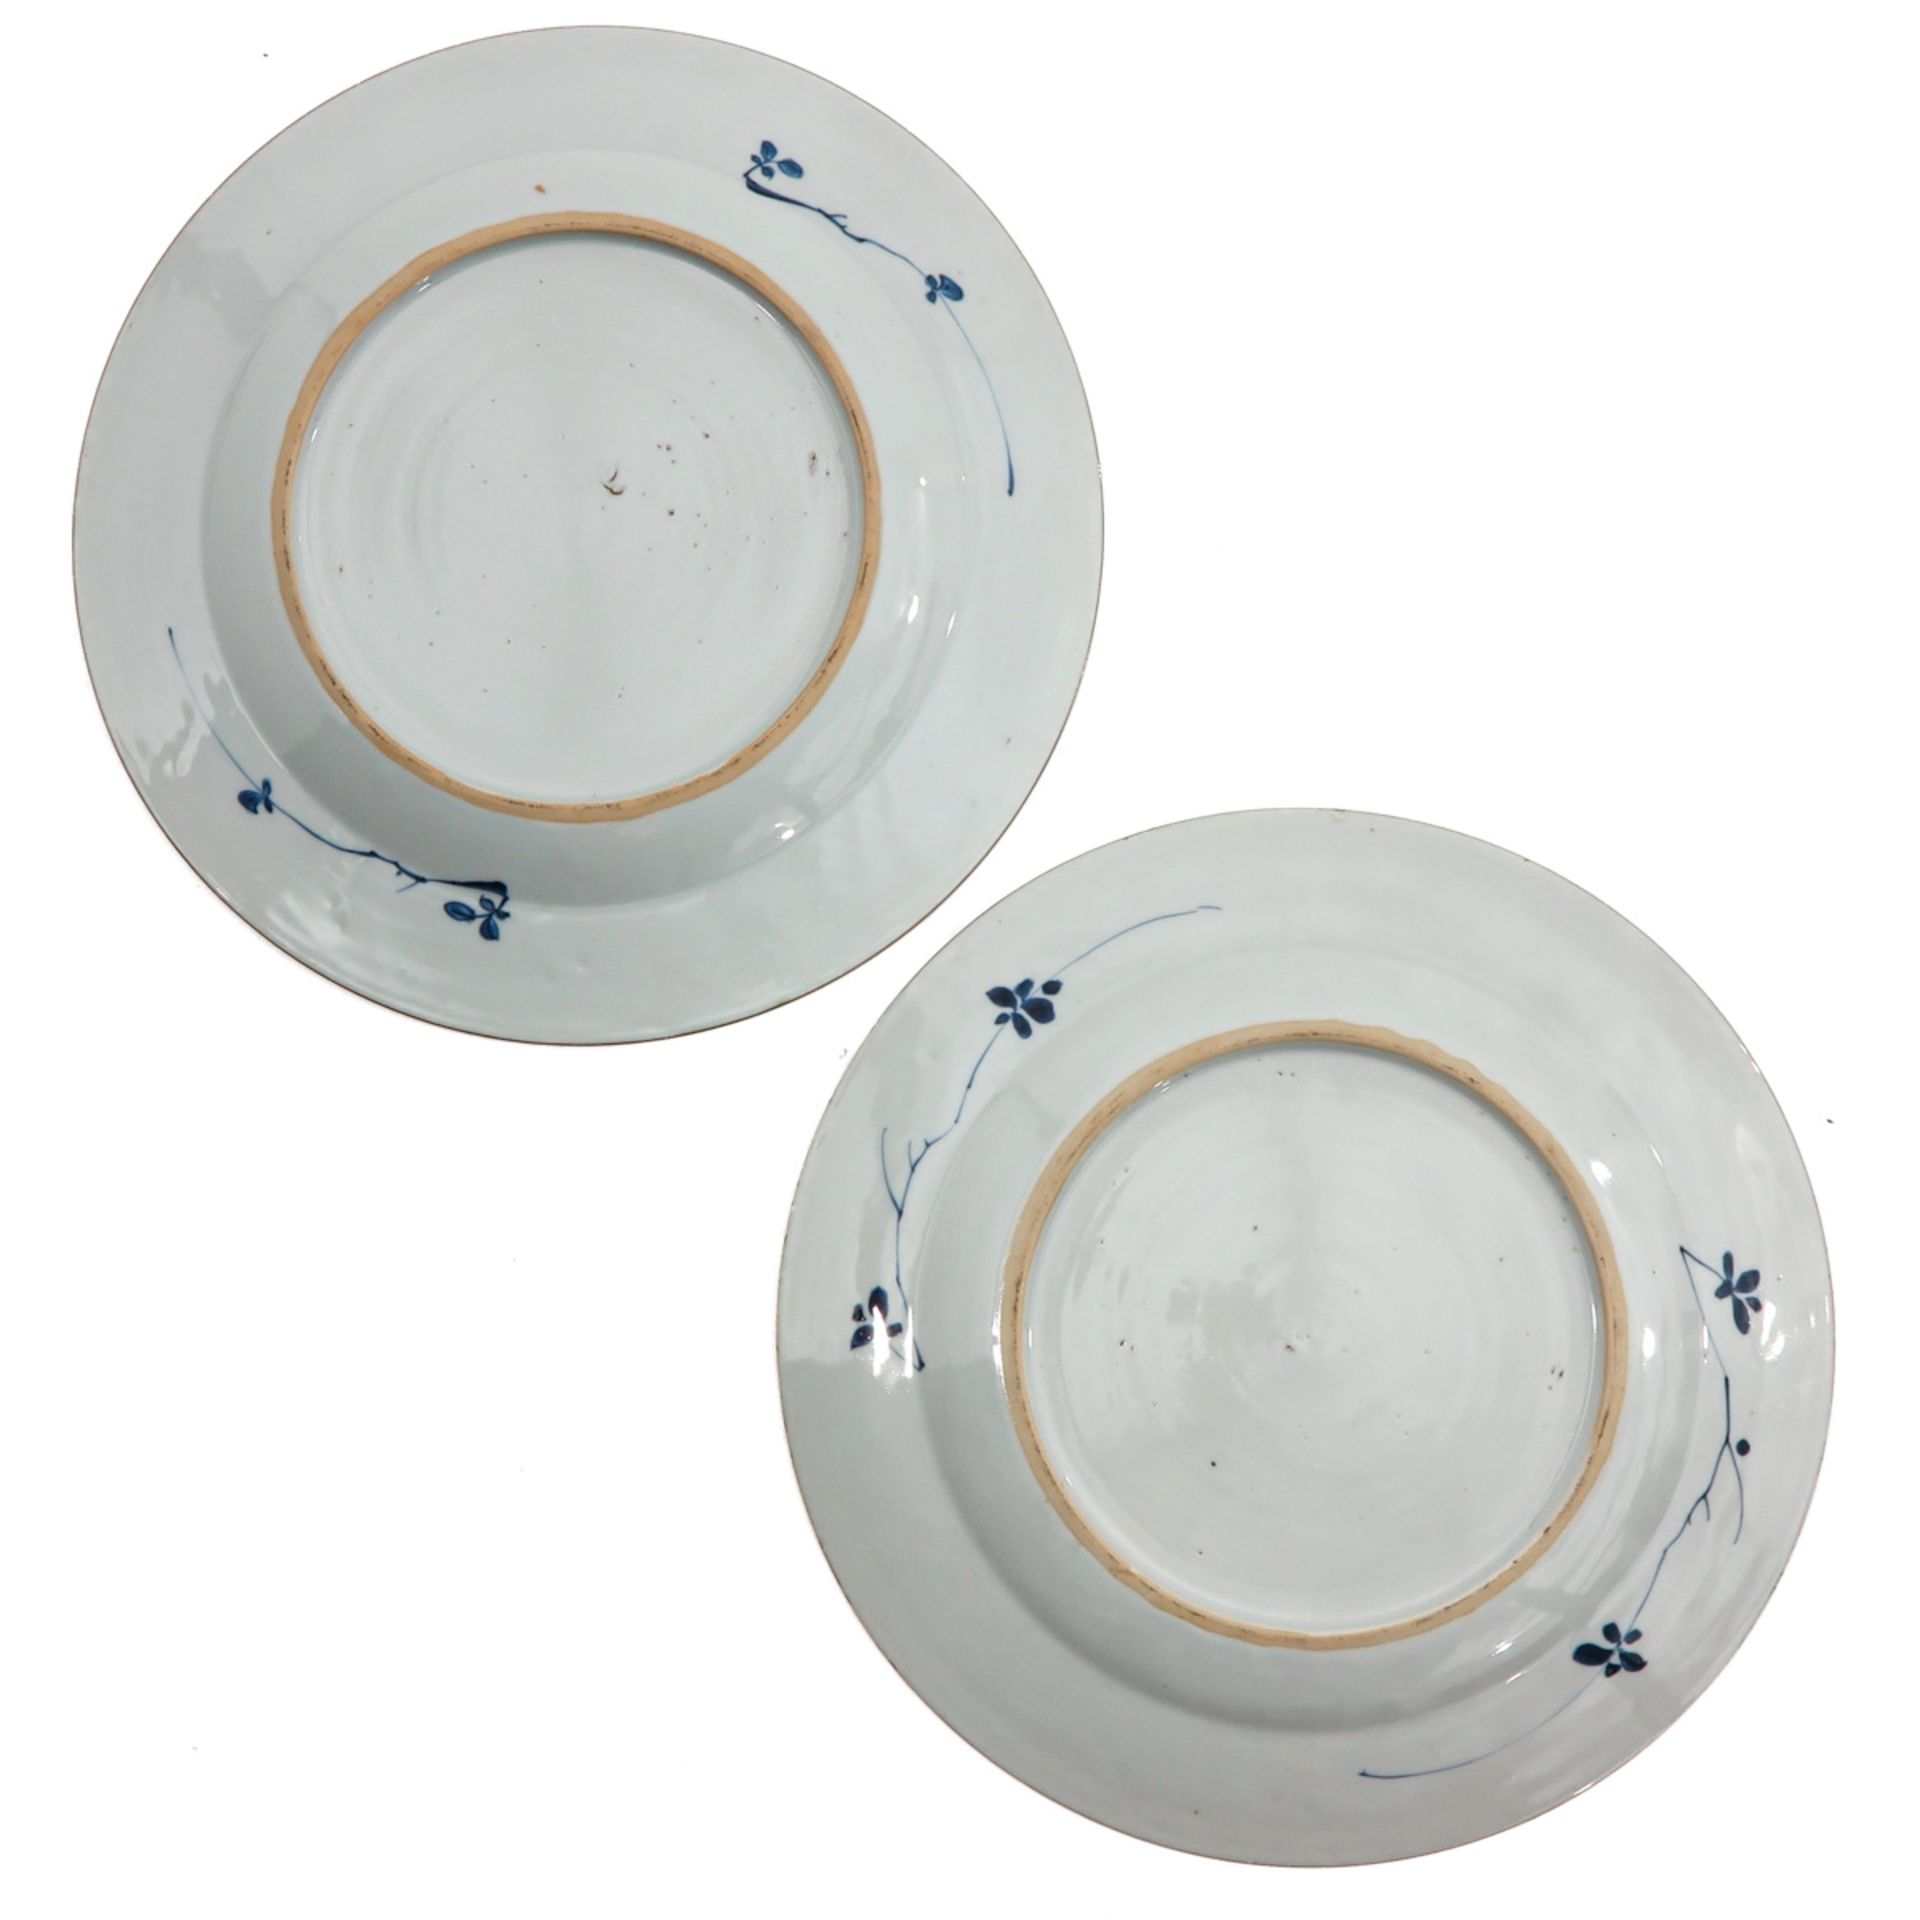 A Series of 6 Blue and White Plates - Image 6 of 10